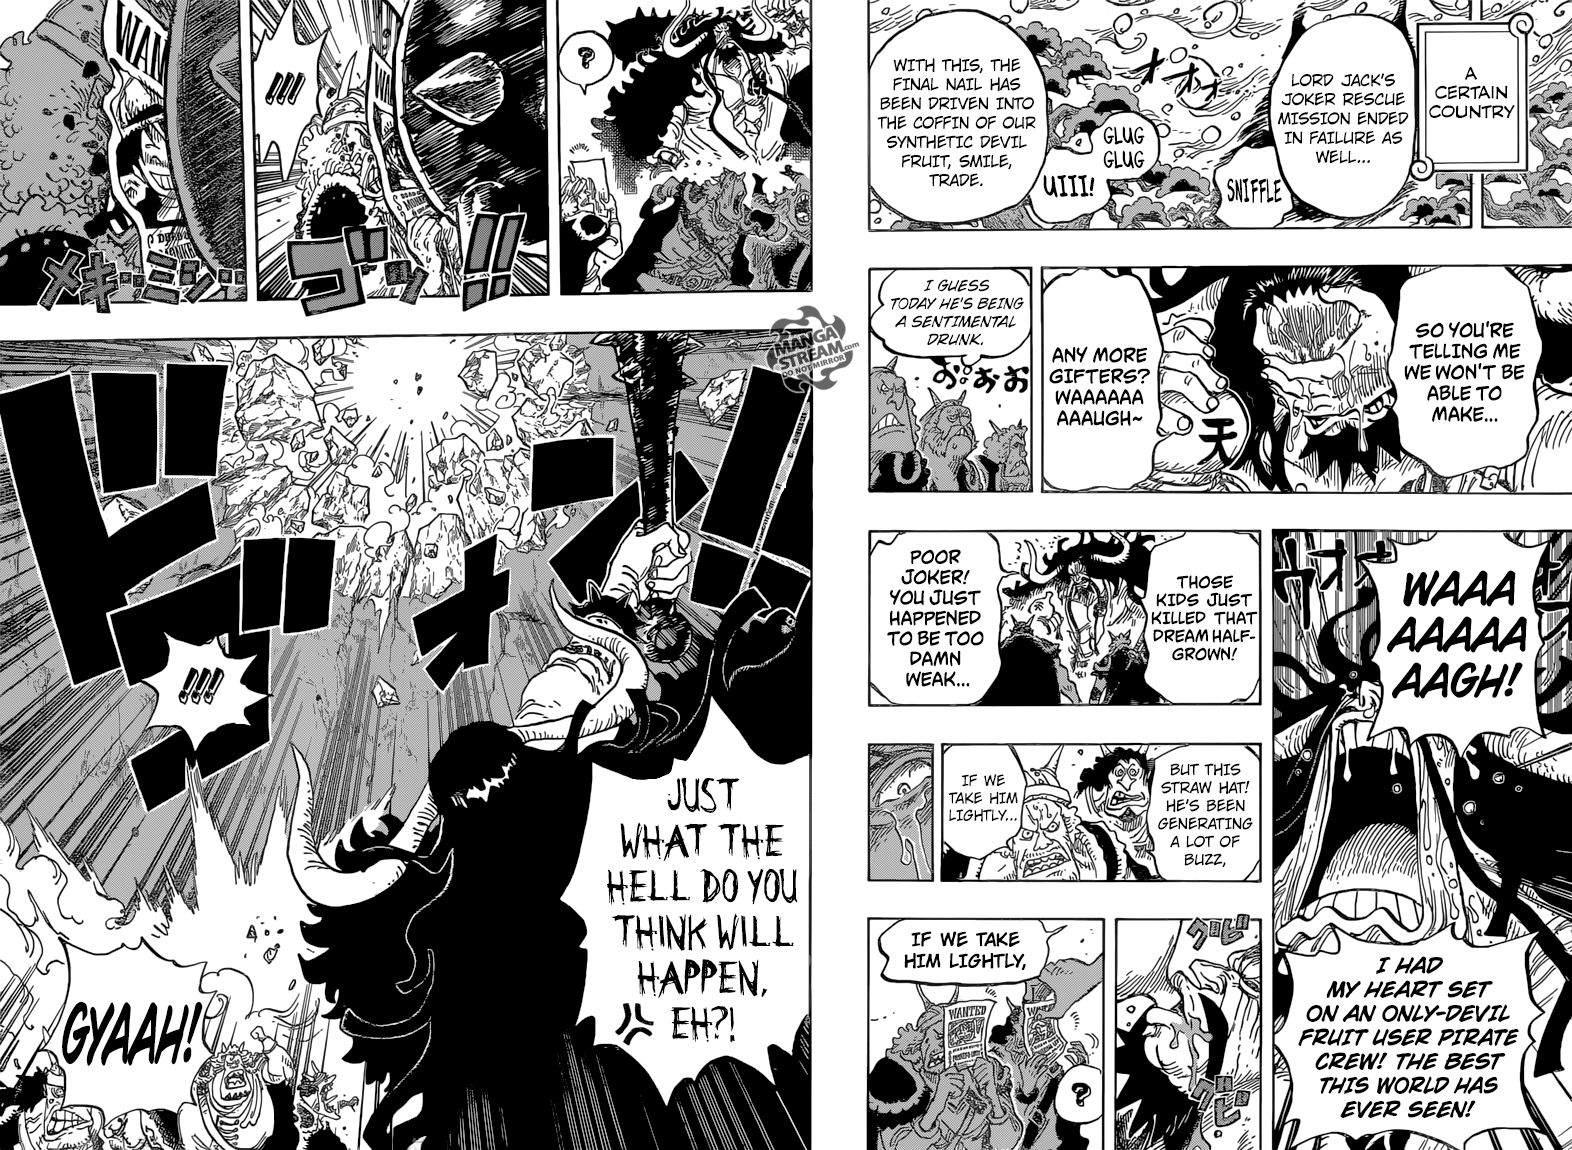 One Piece 824: Luffy's cooking is possibly better than mine!